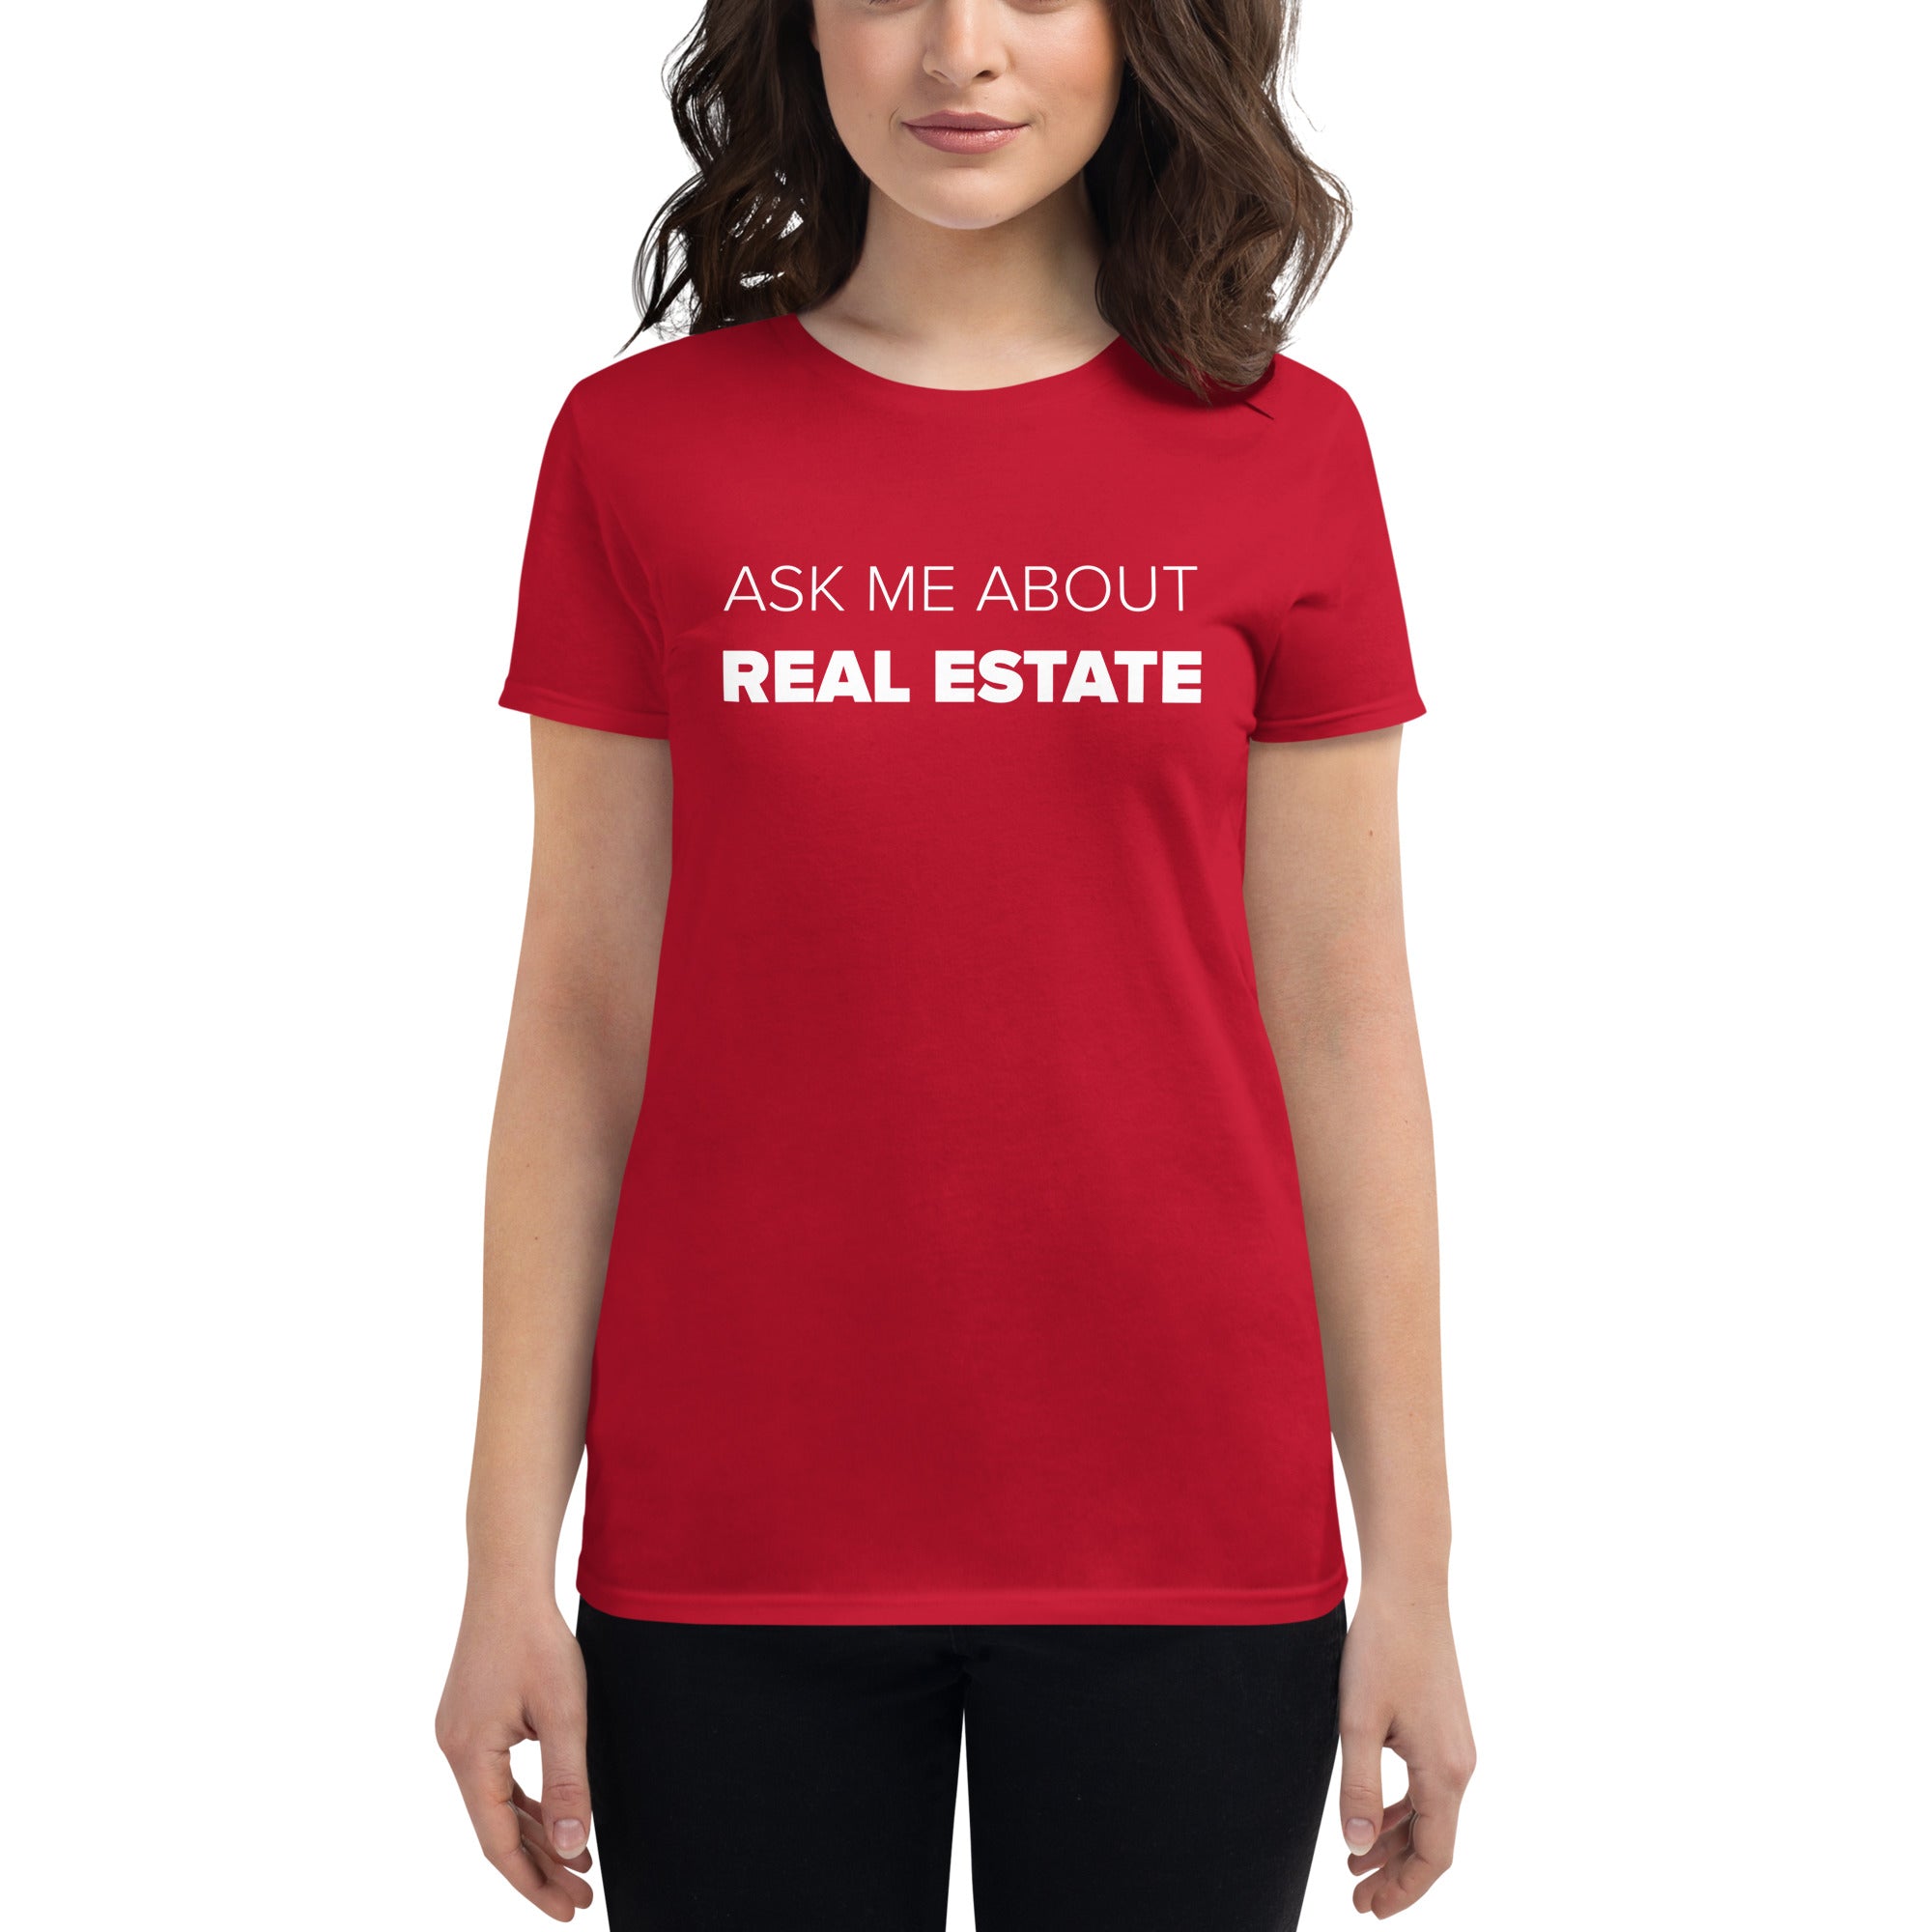 Ask Me About Real Estate Women's Fit Short Sleeve T-shirt